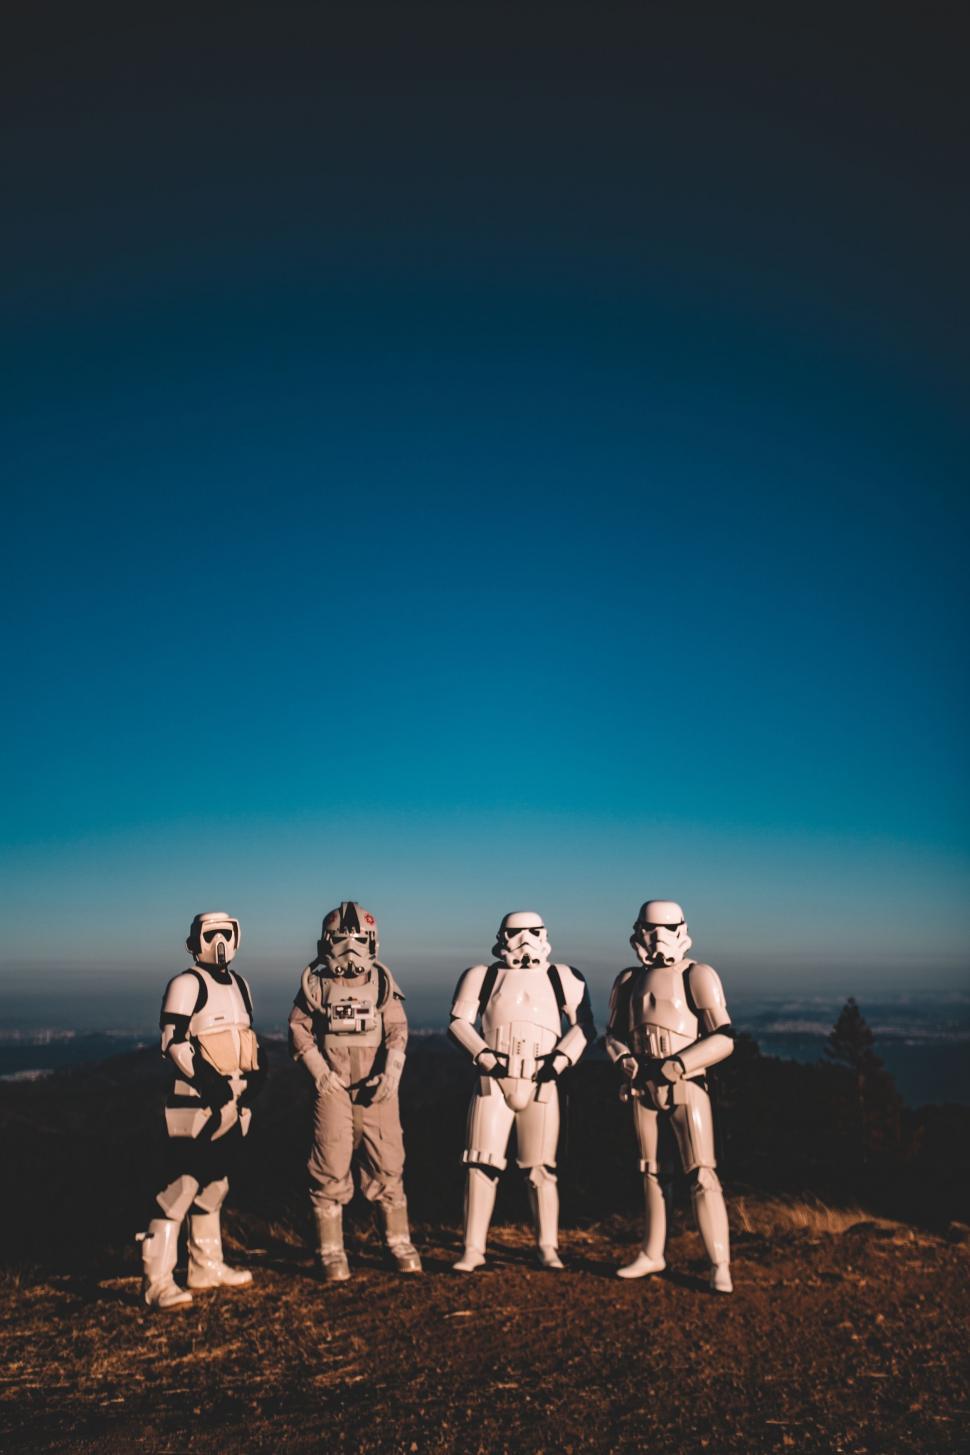 Free Image of Group of Star Wars Figures Standing on Top of Hill 